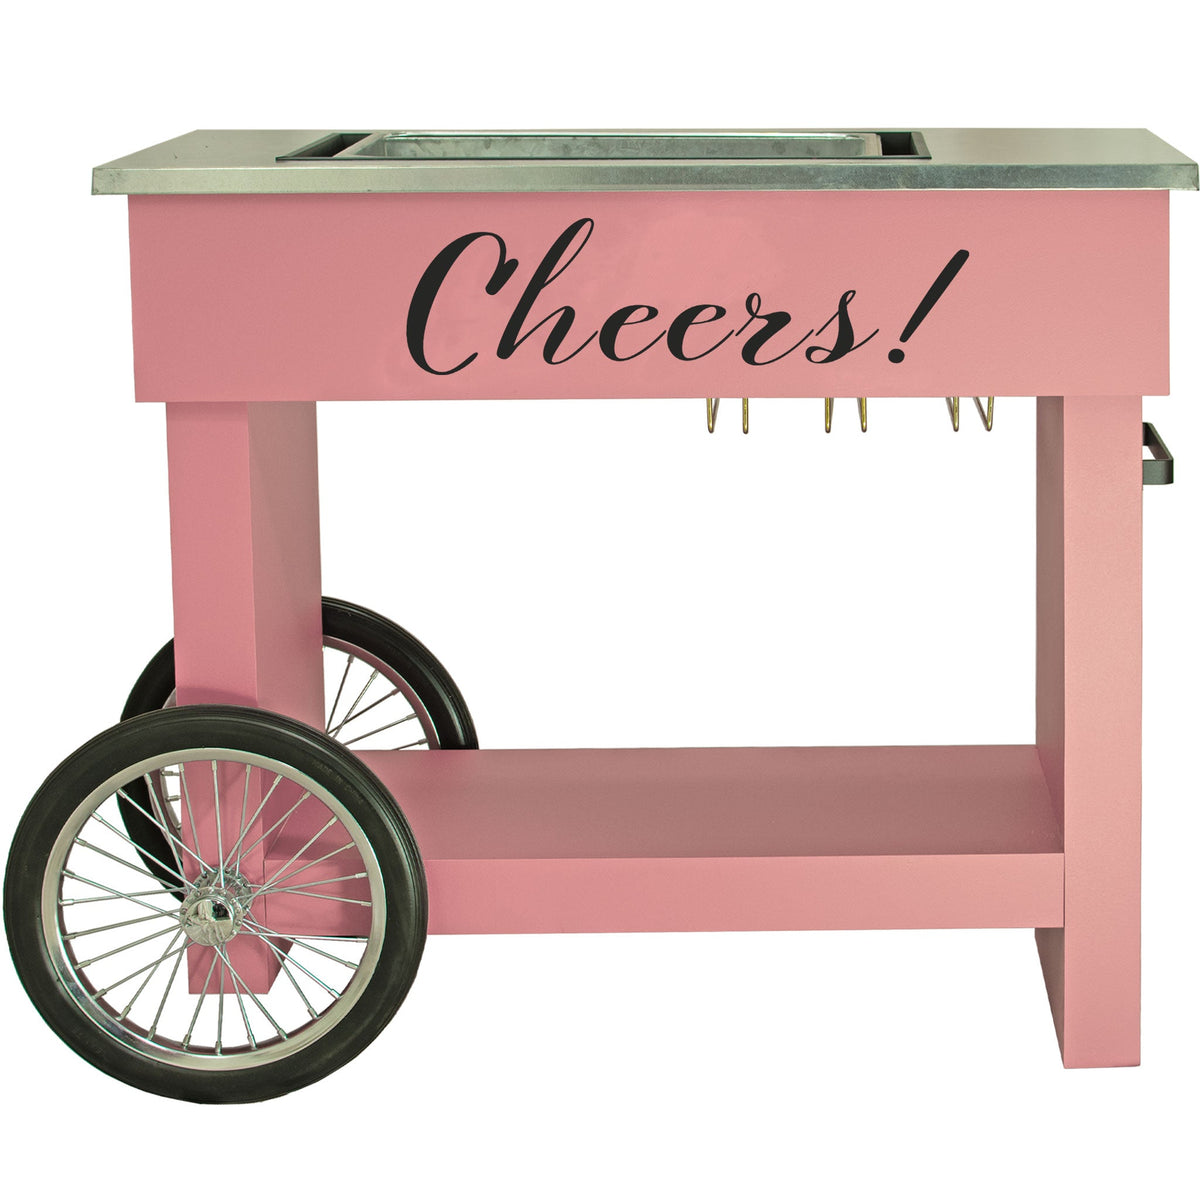 Lee Display's Champagne and Wine Bar Cart with Wheels in Pink Color and a Cheers! Decal